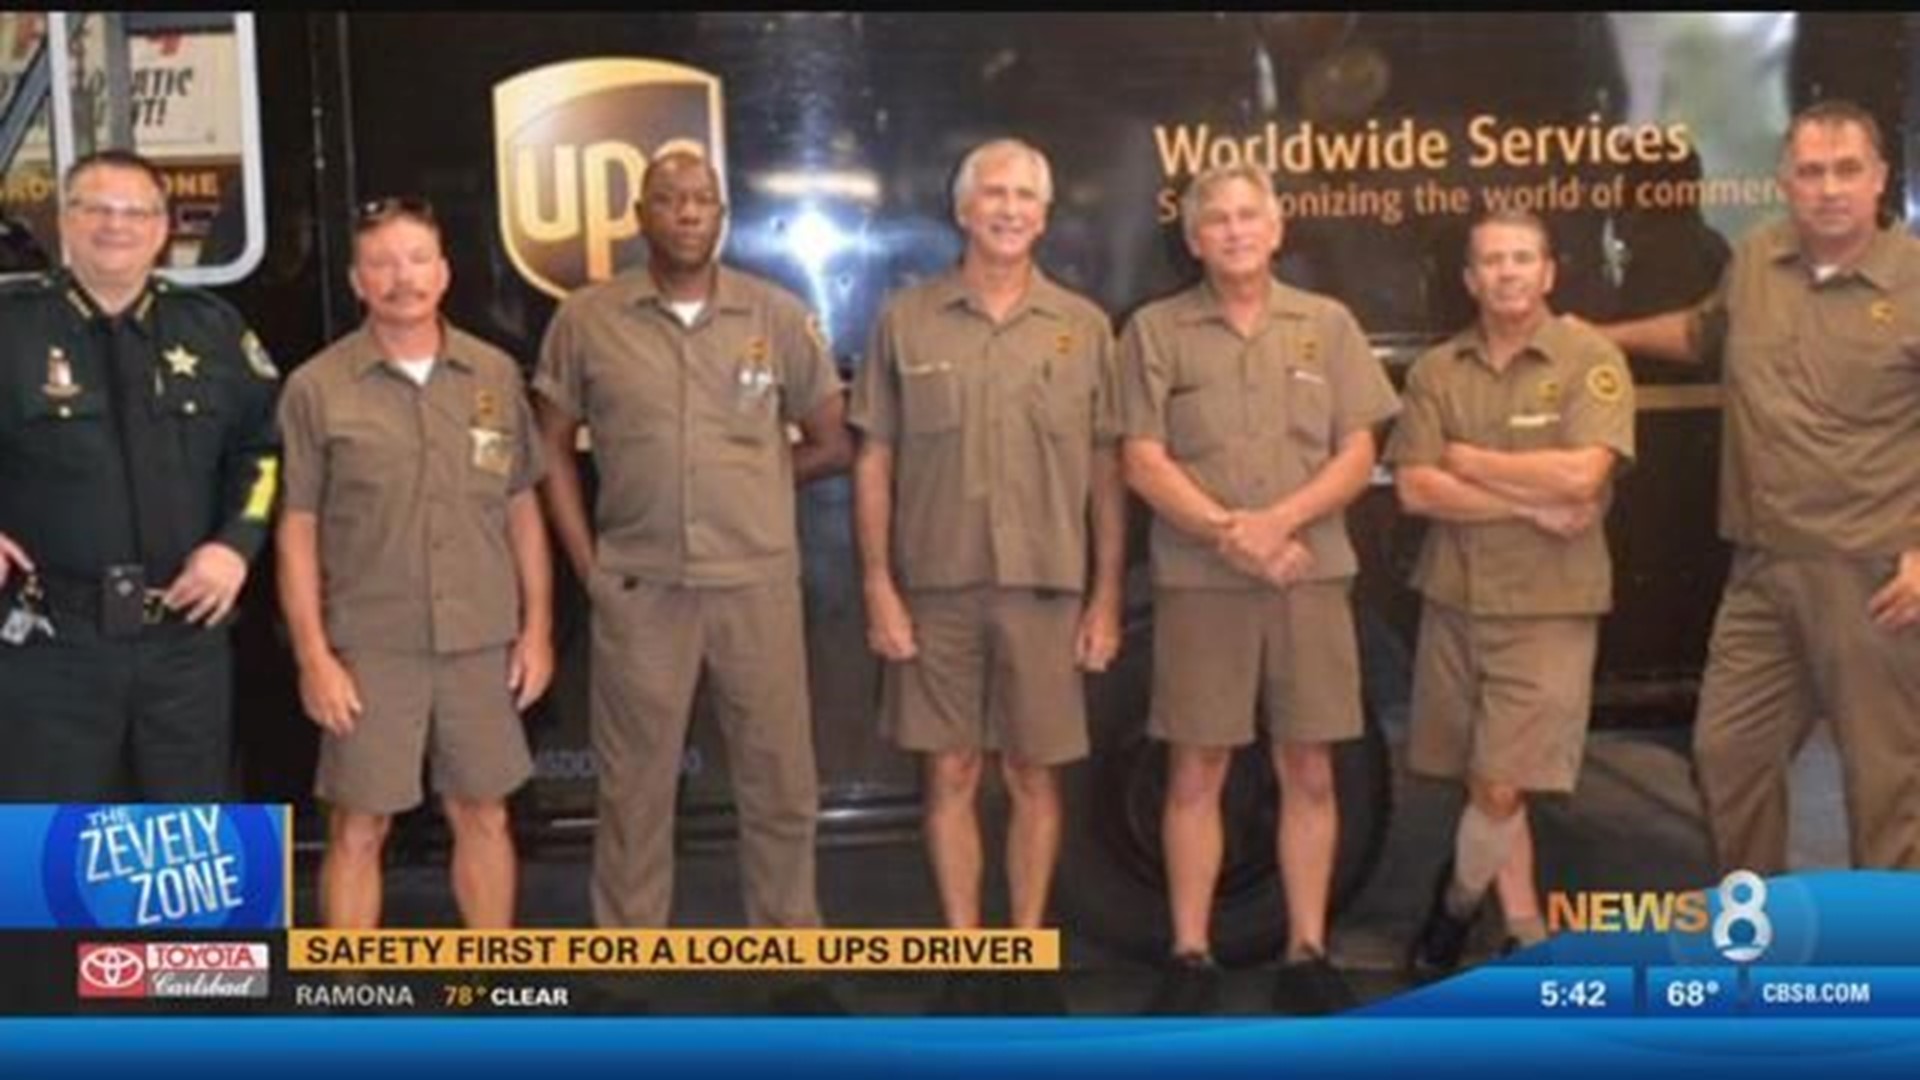 Zevely Zone: Safety first for San Diego UPS driver